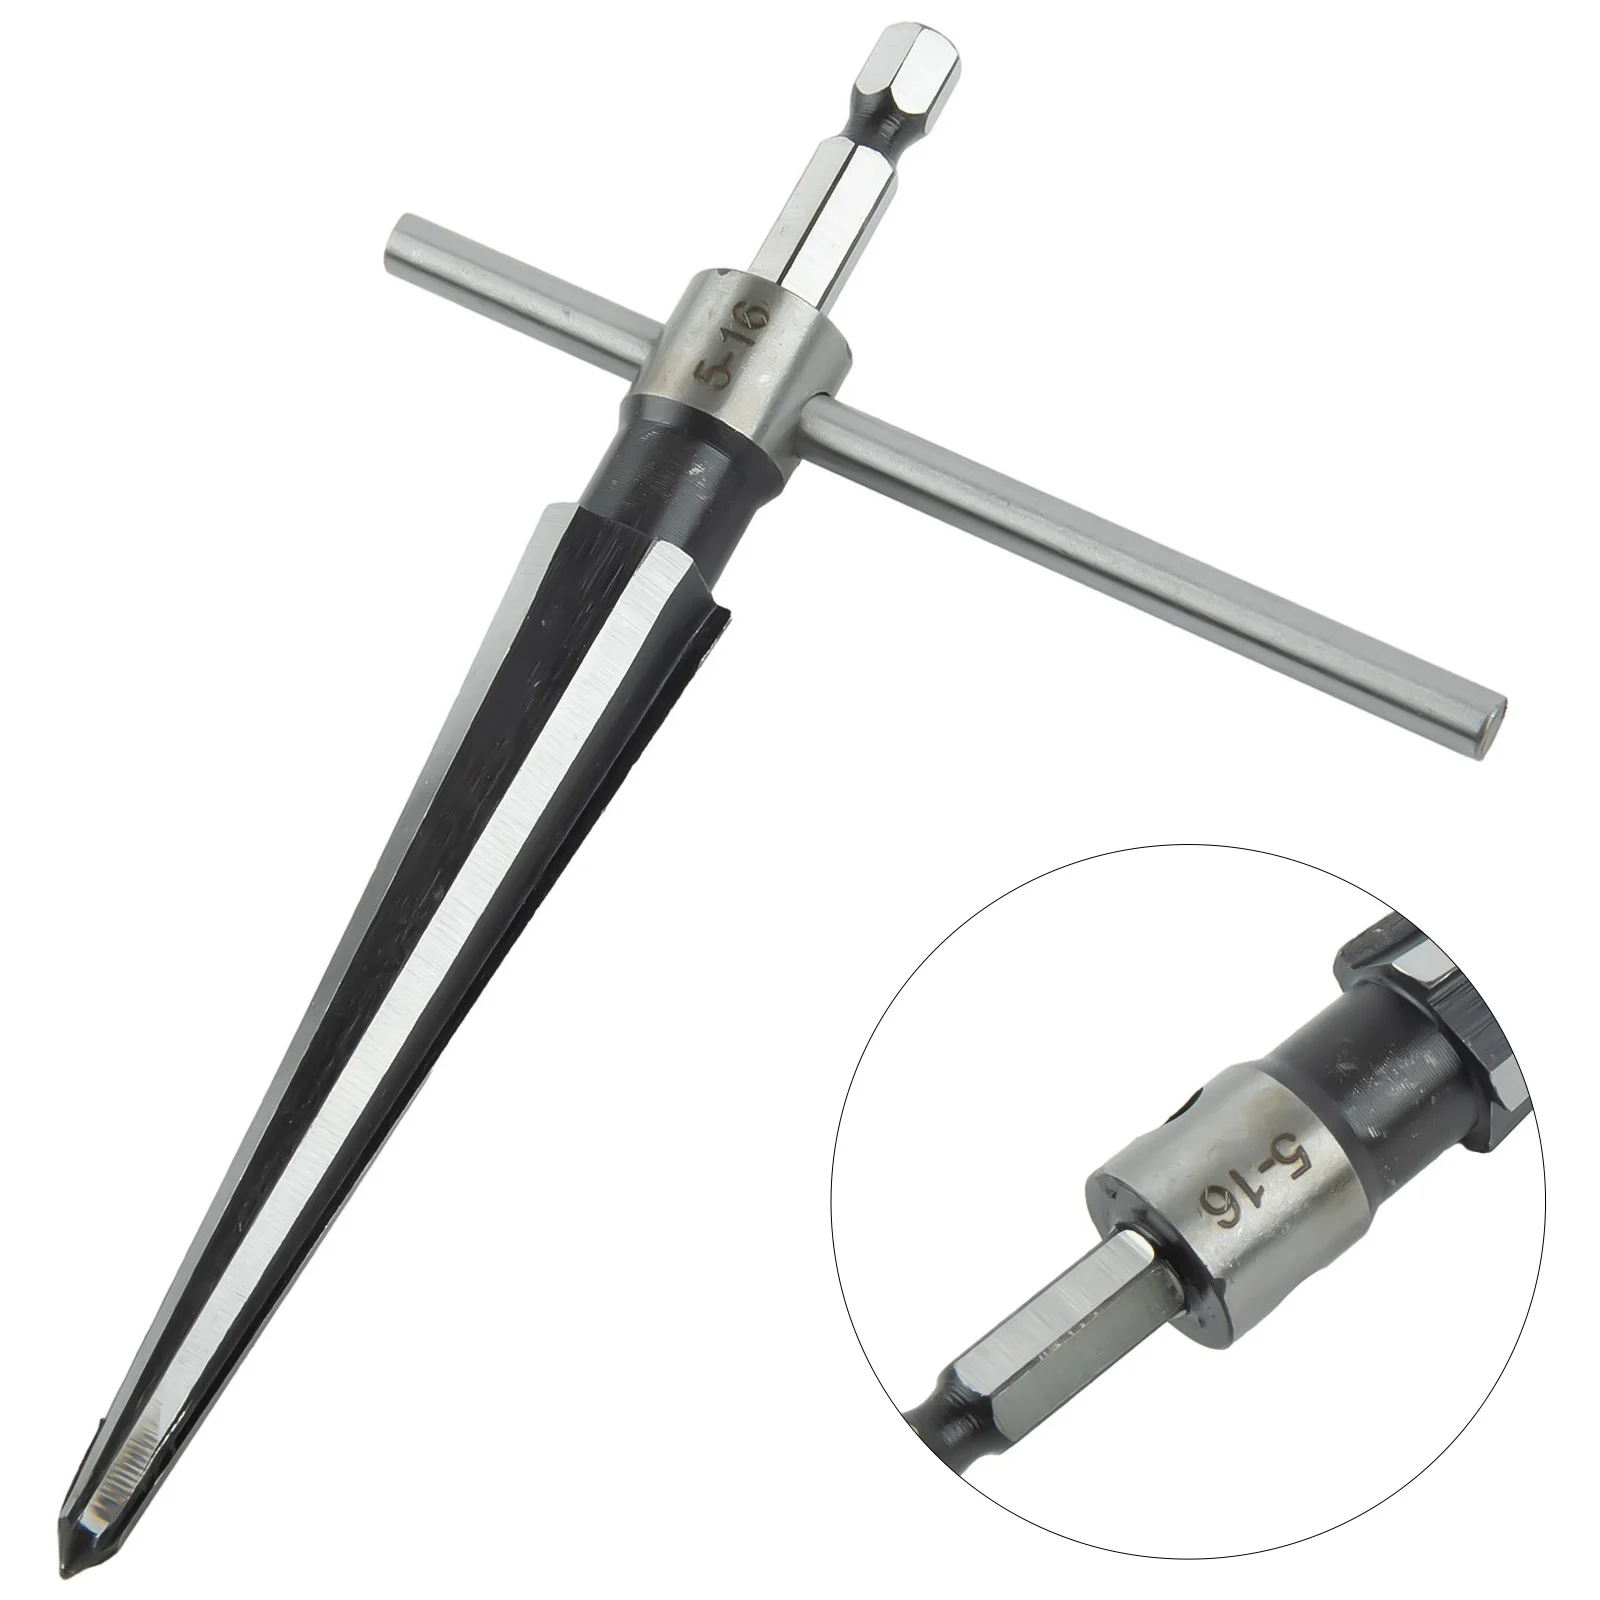 1 Pc Hand Held Tapered Reamer 5-16mm T Handle 6 Flute Beveling Cutting Drill Tool For Woodworking Carpentry Tools Accessories